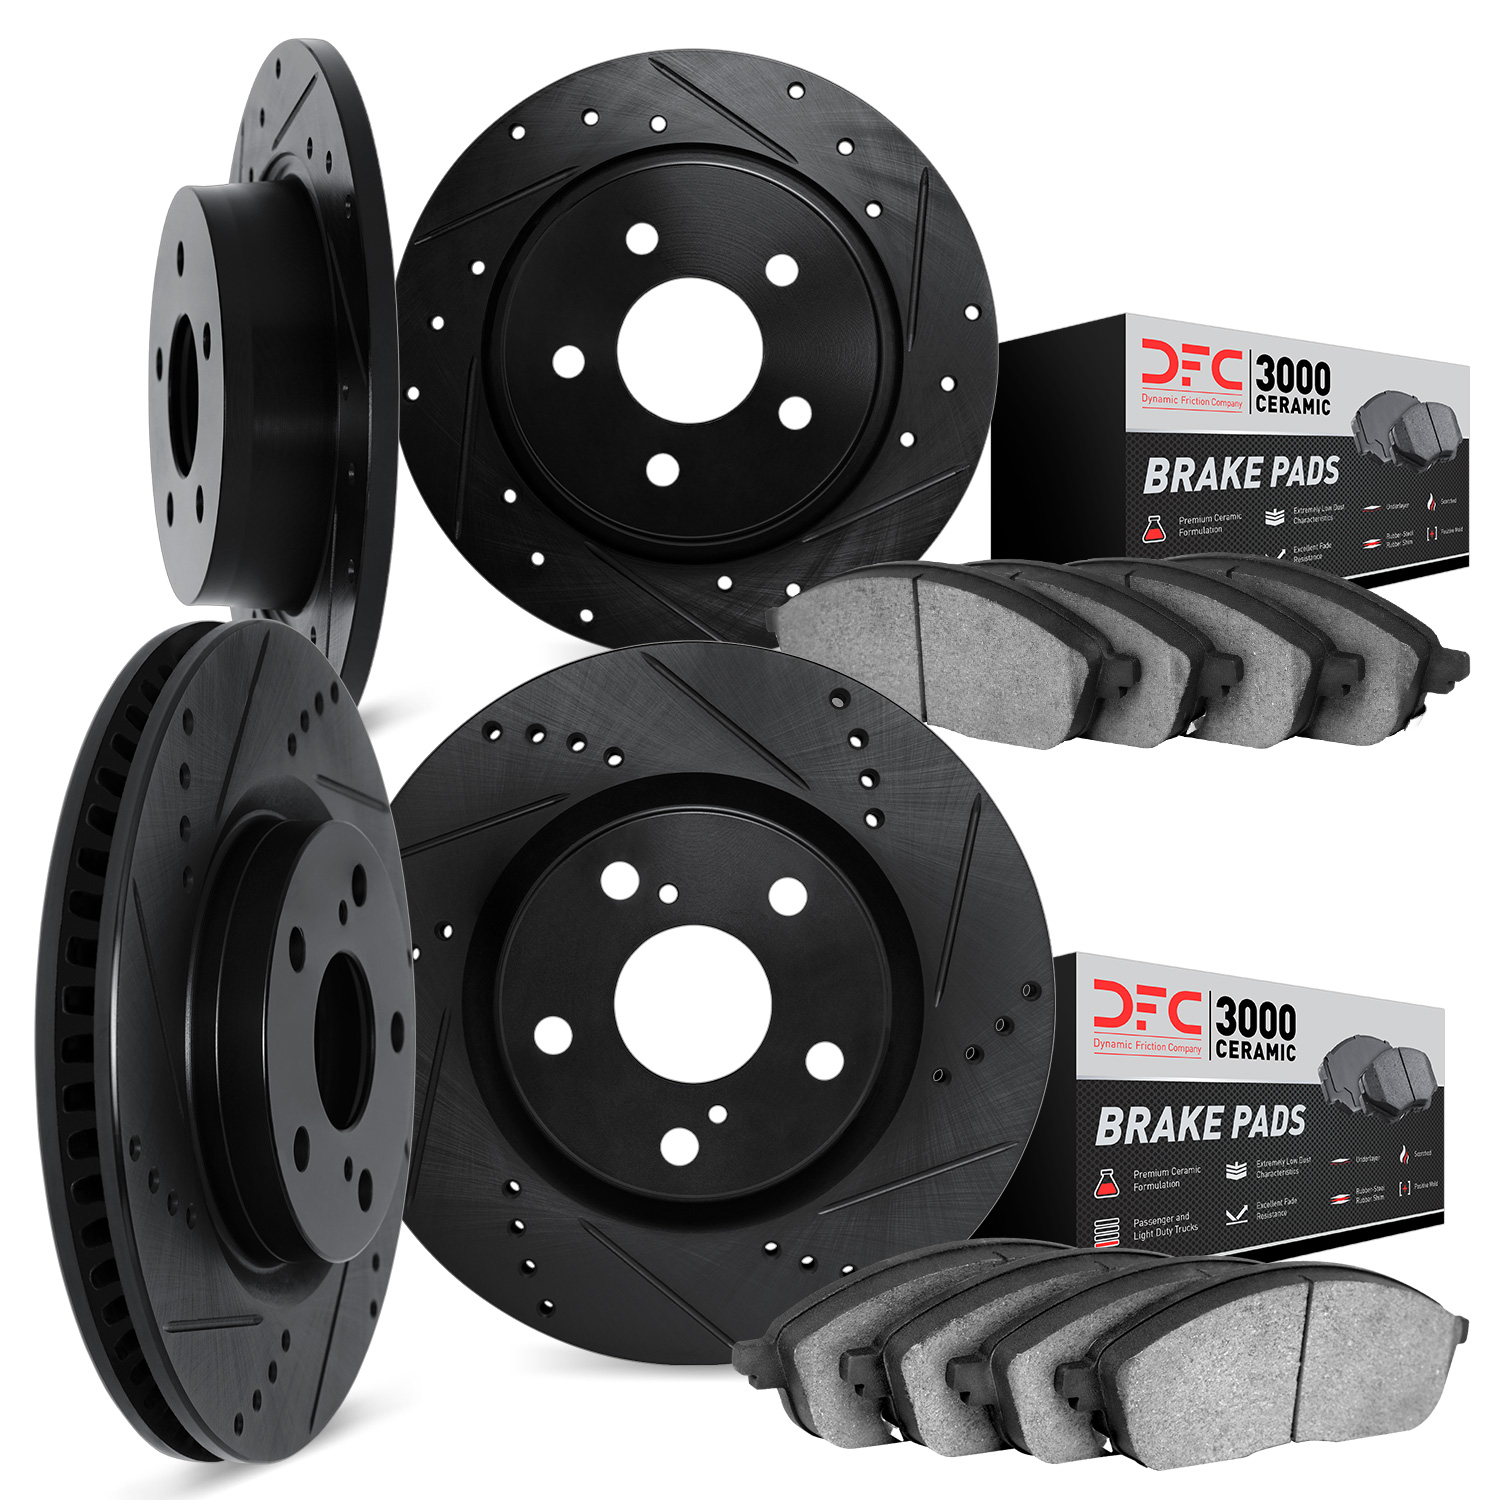 8304-11007 Drilled/Slotted Brake Rotors with 3000-Series Ceramic Brake Pads Kit [Black], 2003-2005 Land Rover, Position: Front a